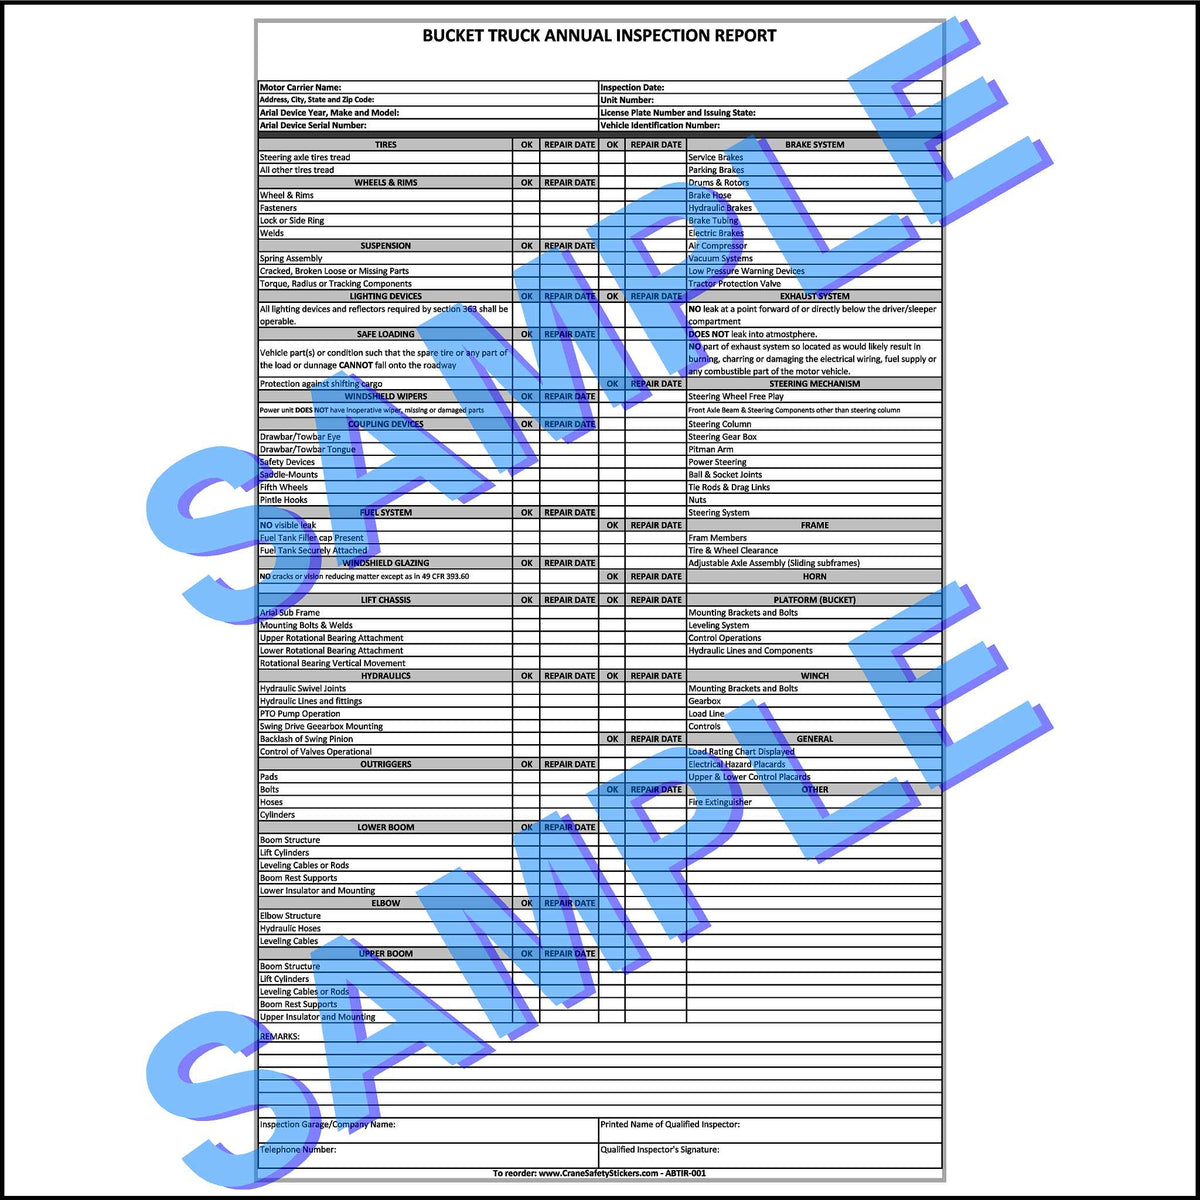 Bucket Truck Inspection Checklist for Annual Inspections. 3 Ply or 3 copy carbonless.